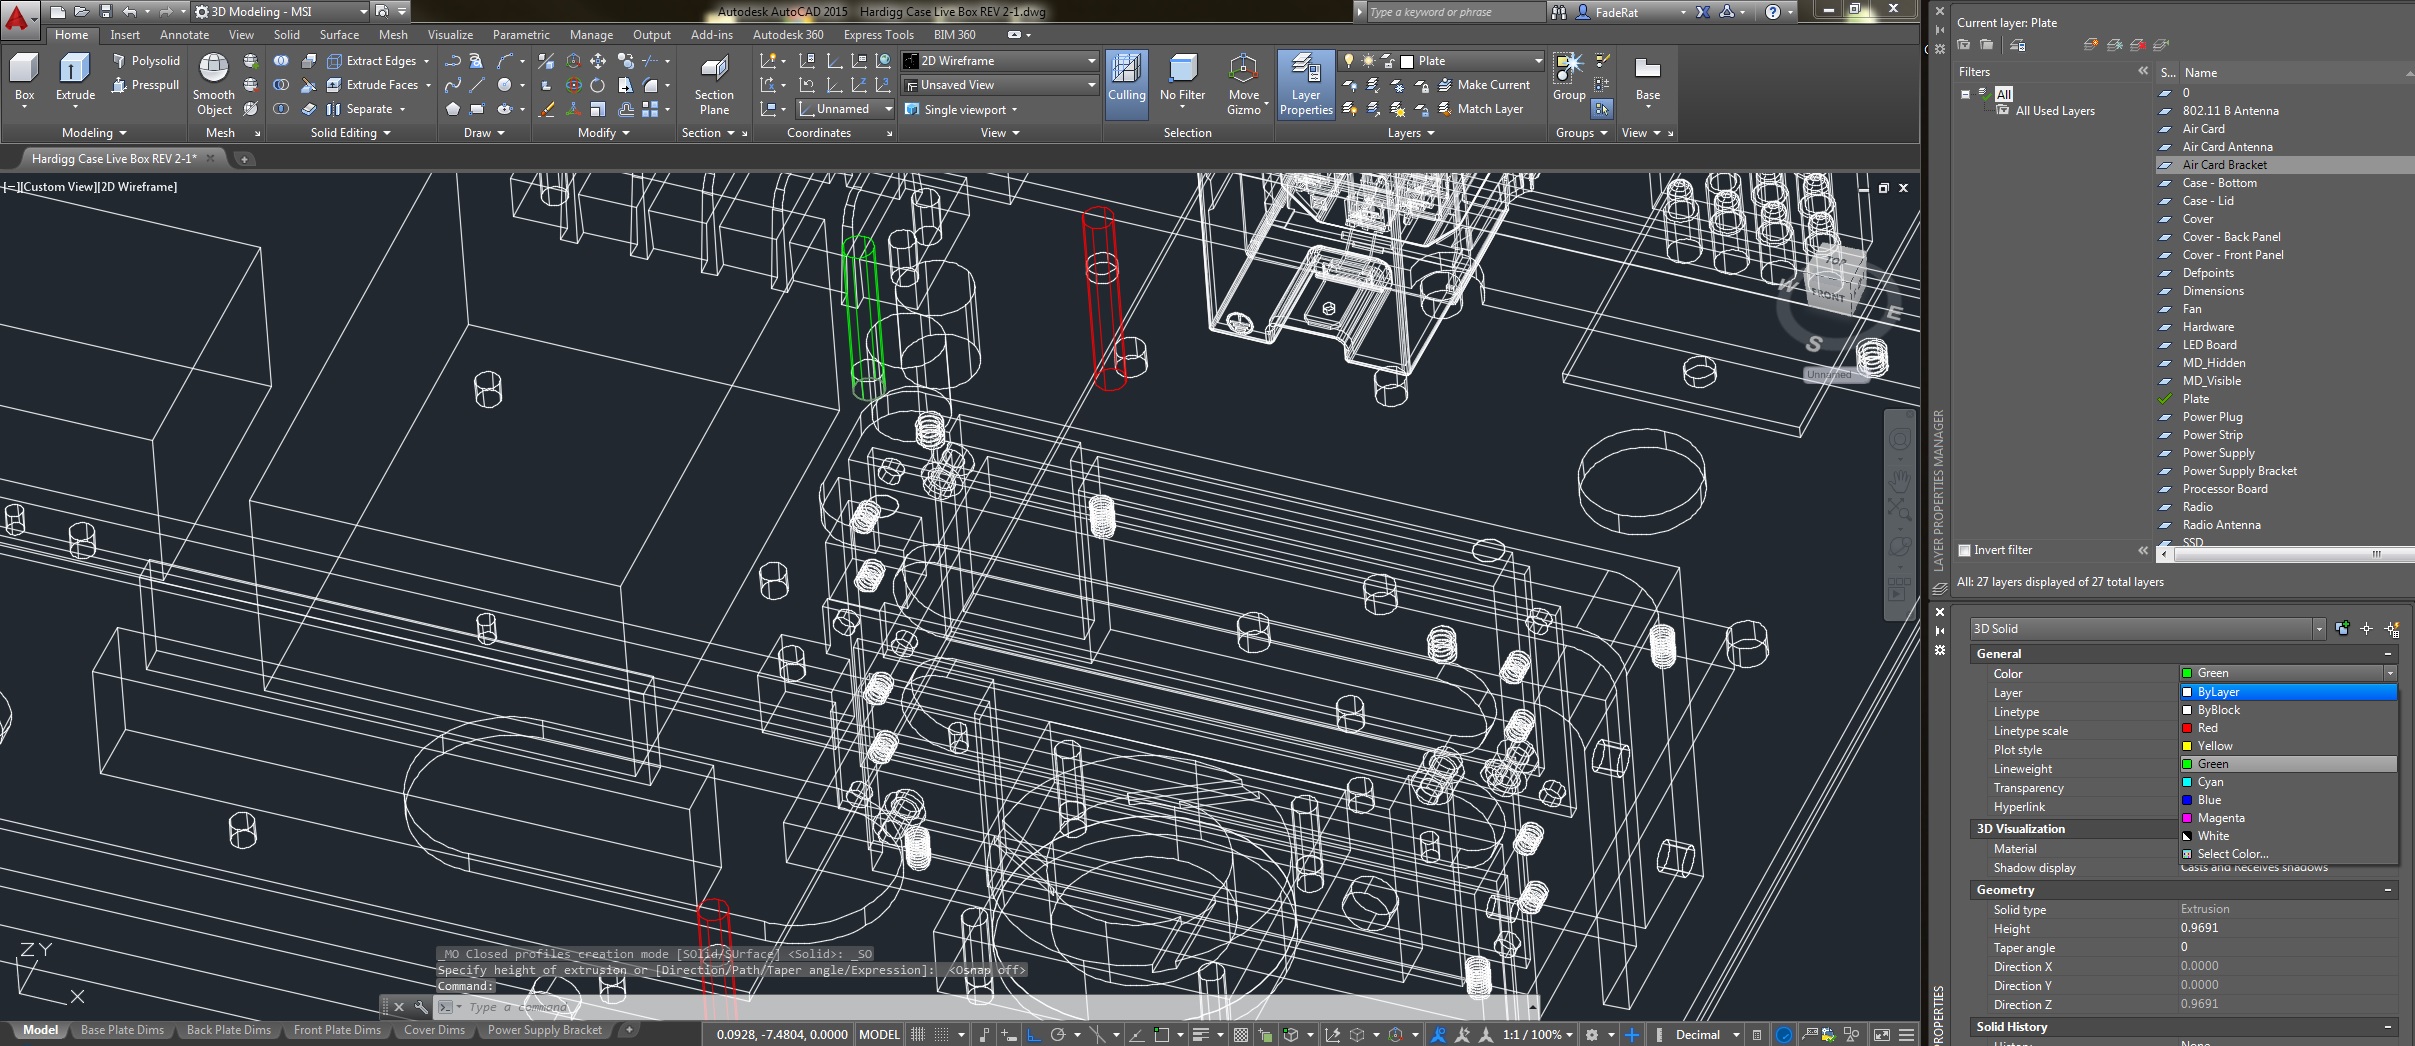 download autocad 2010 full version free